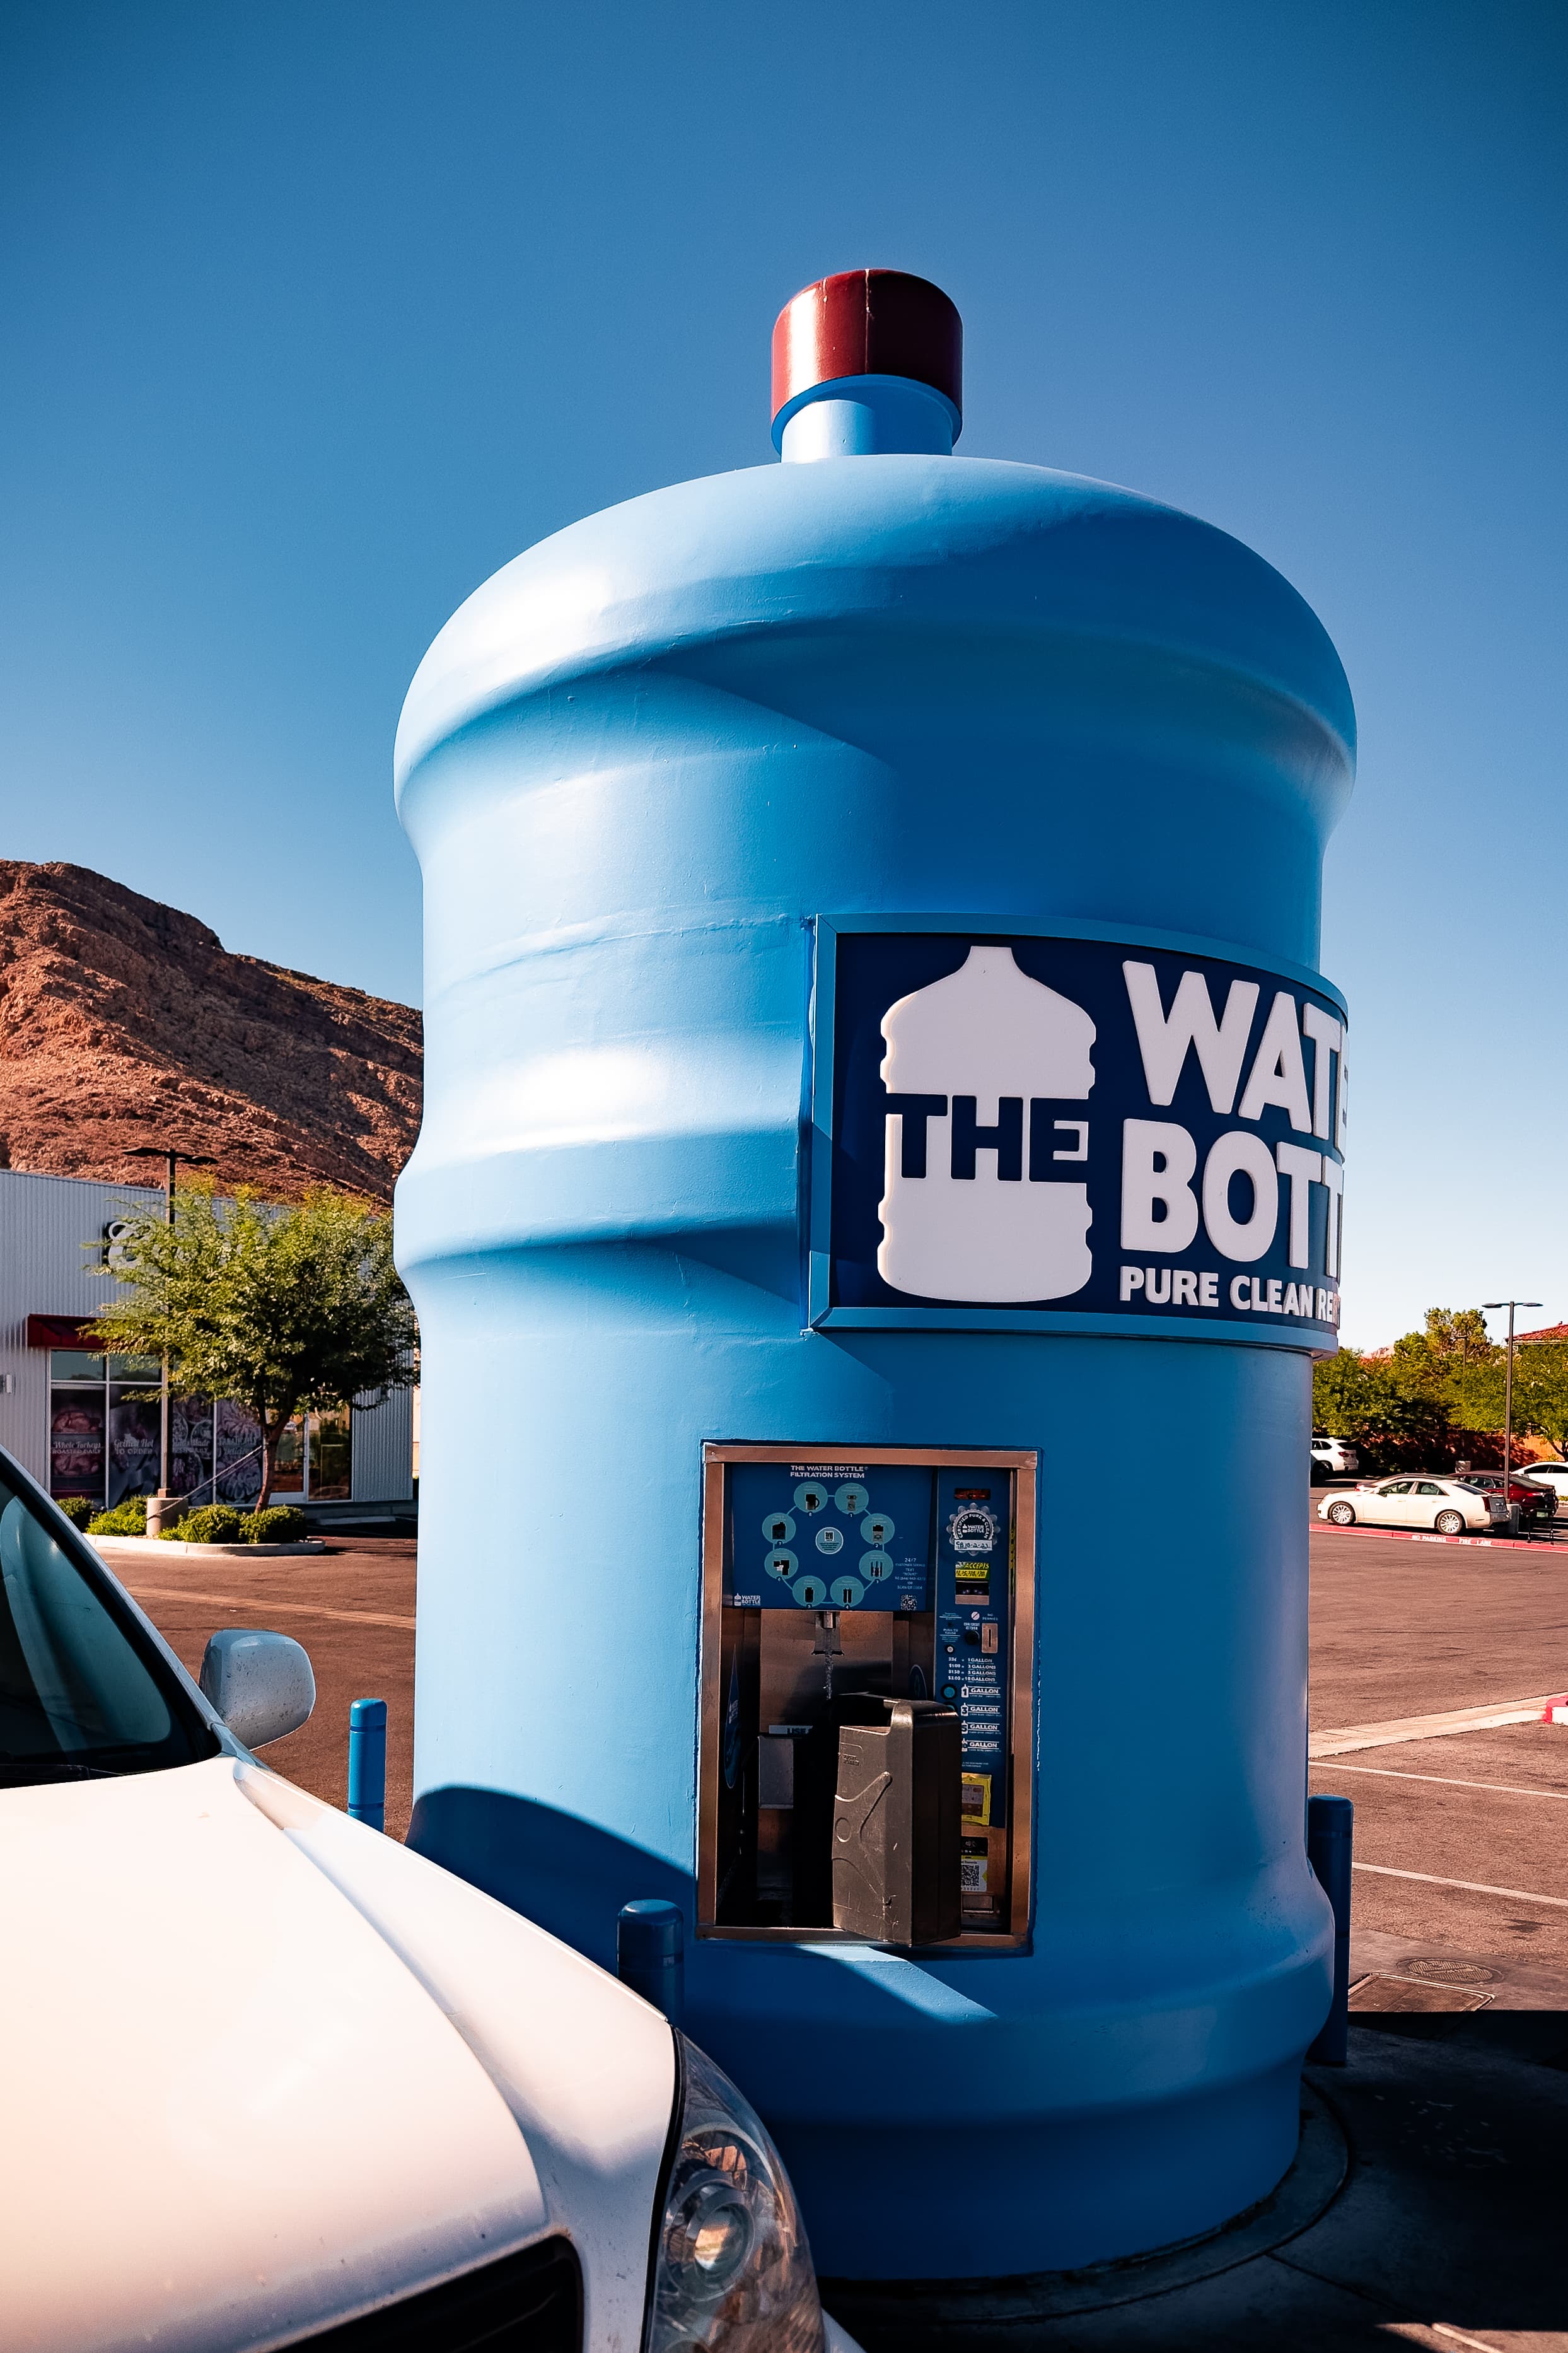 A large blue water bottle-shaped structure housing a water refill station in a parking lot, with clear skies and a mountain in the background.